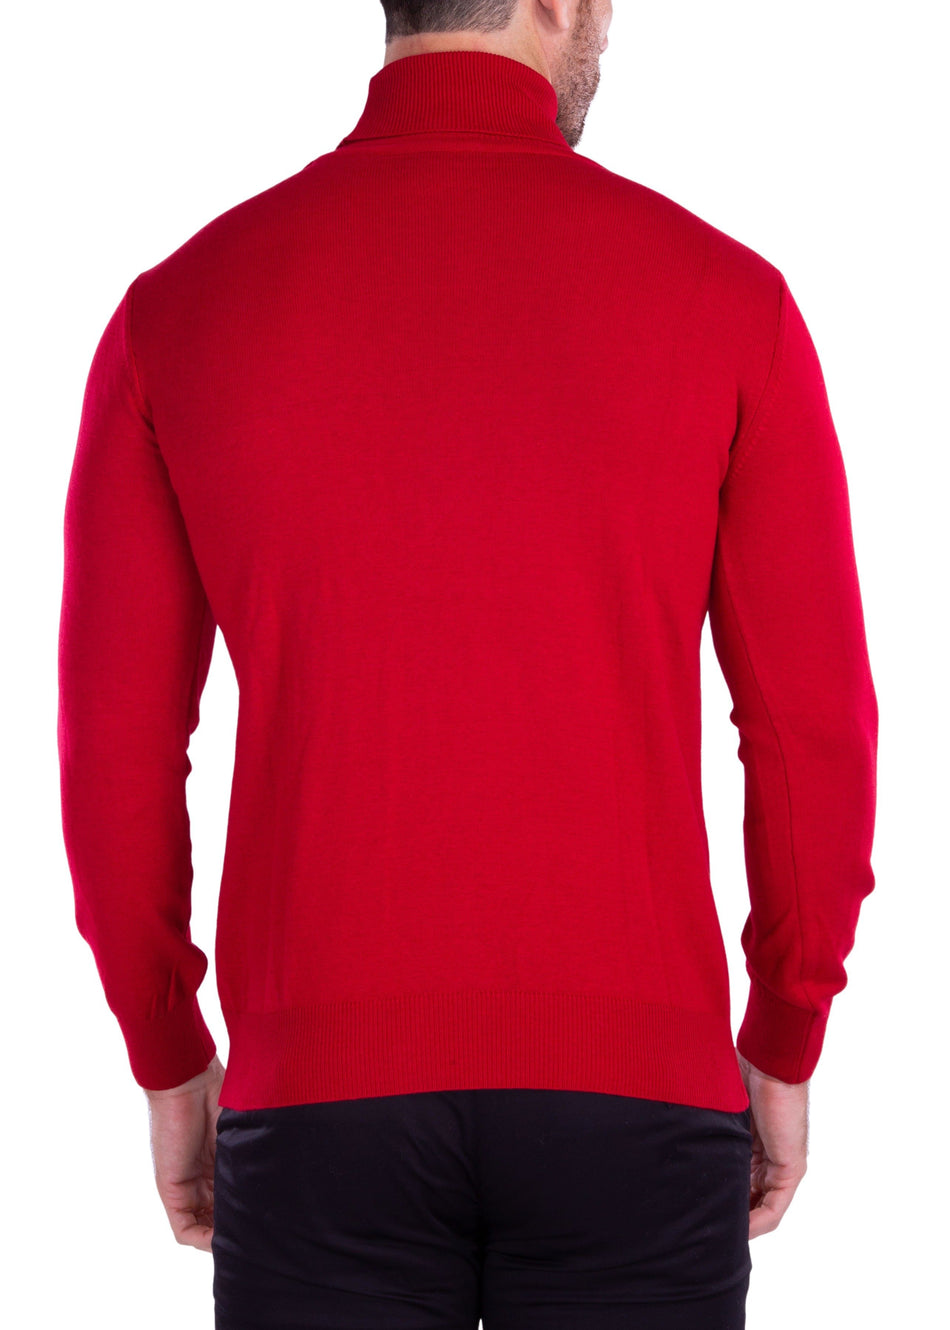 215100 - Red Turtleneck Sweater